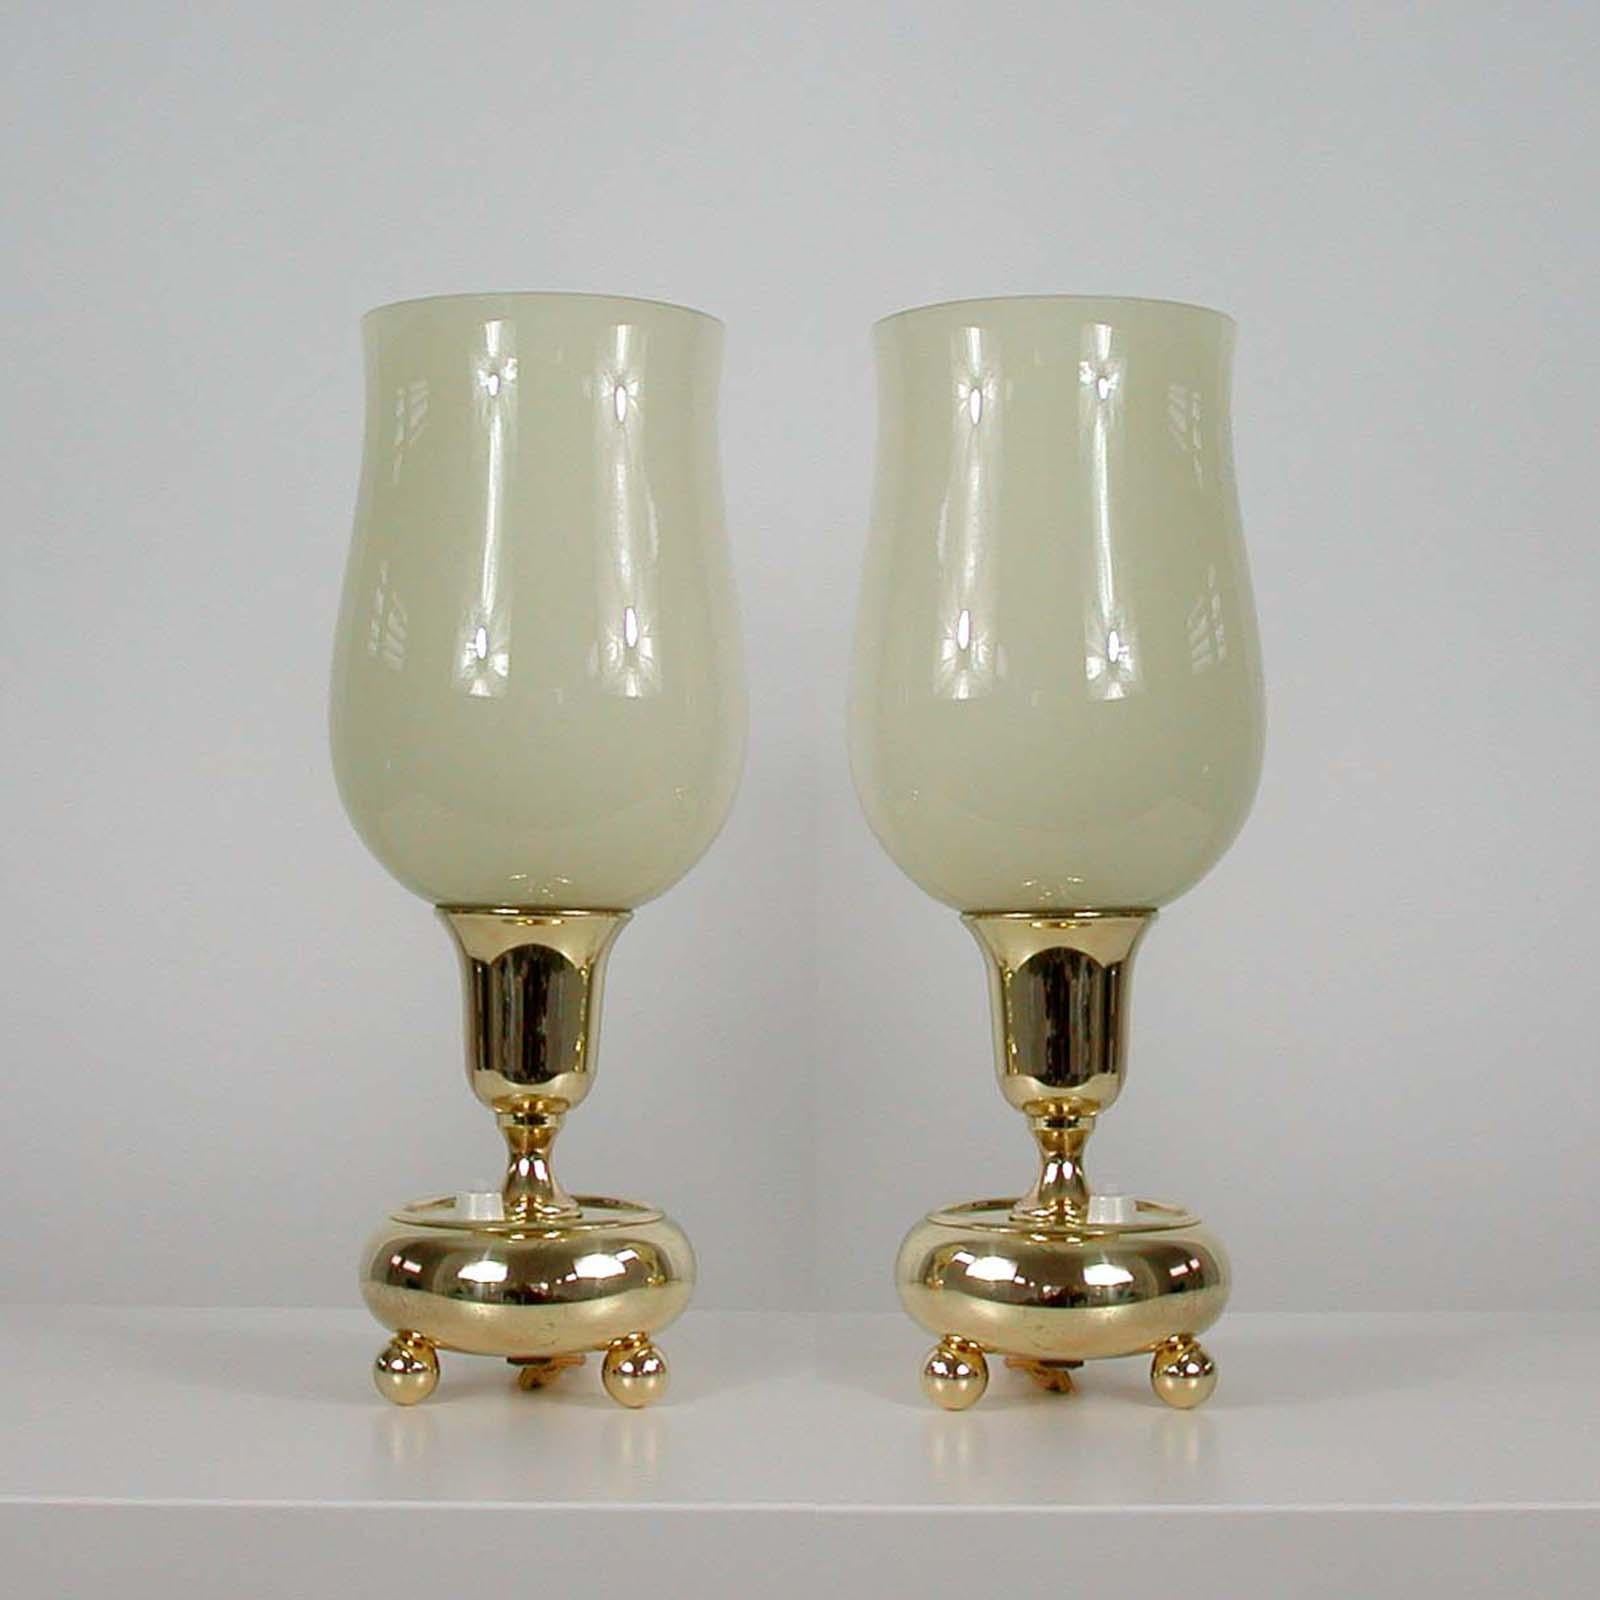 These table or bedside lamps were designed and manufactured in Germany in the 1930s during the Bauhaus period. They are made of brass and have got cream colored opaline glass lamp shades.

Both lamps have been re-electrified and rewired with new